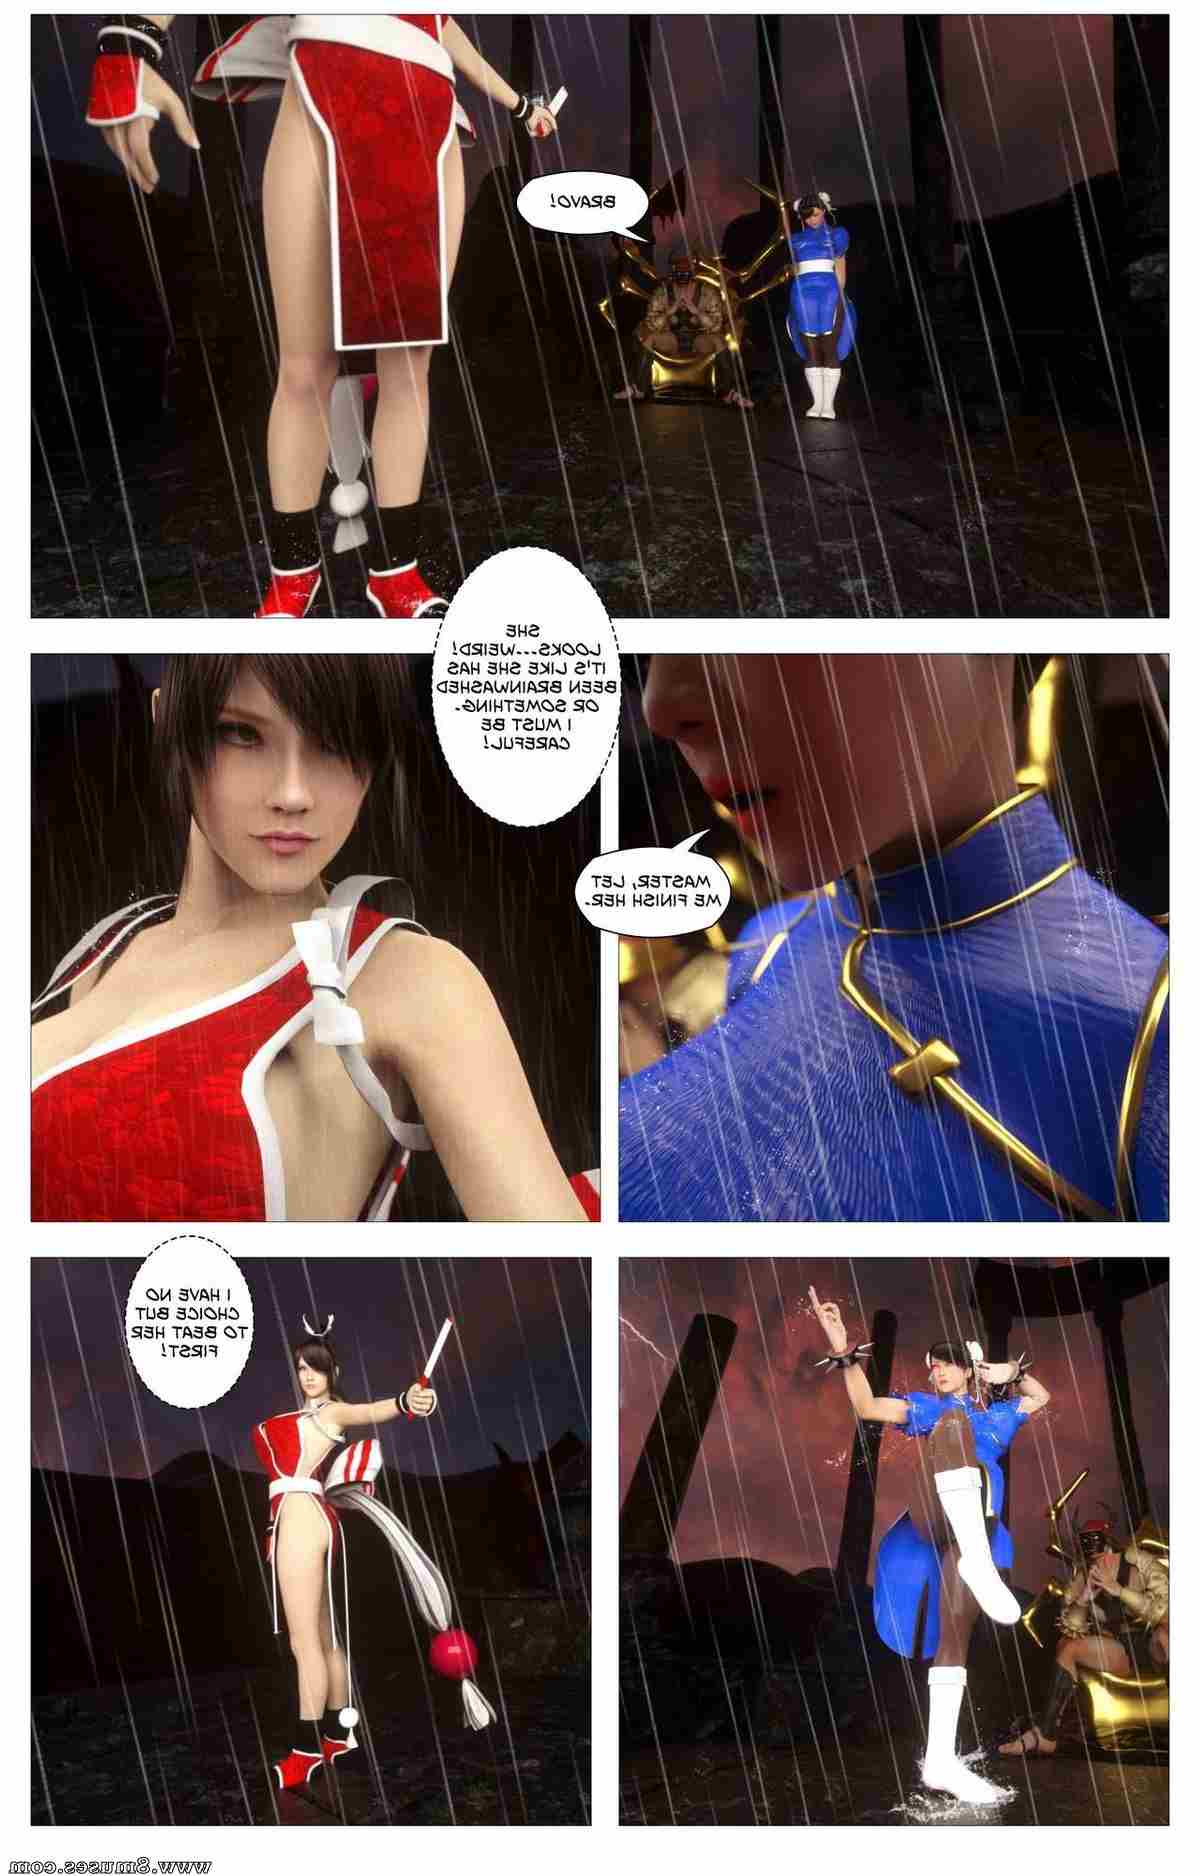 G9MP-Comics/Sin-Fighters-X Sin_Fighters_X__8muses_-_Sex_and_Porn_Comics_51.jpg